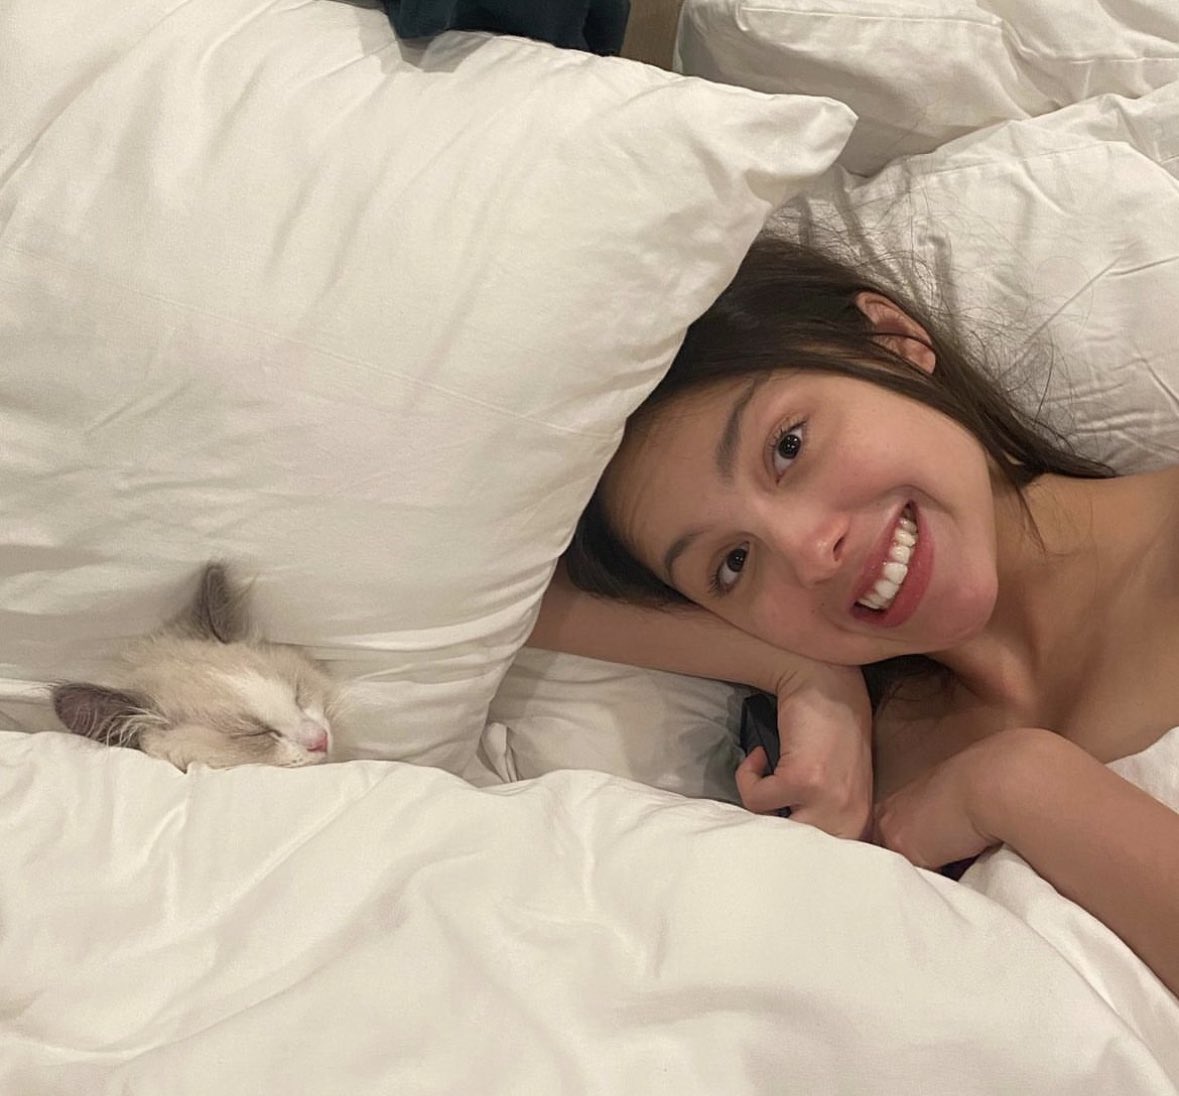 Olivia Rodrigo shares new selfie with Katy Perry ‘TGIF’ lyrics:

“there’s a stranger in my bed. there’s a pounding in my head.”